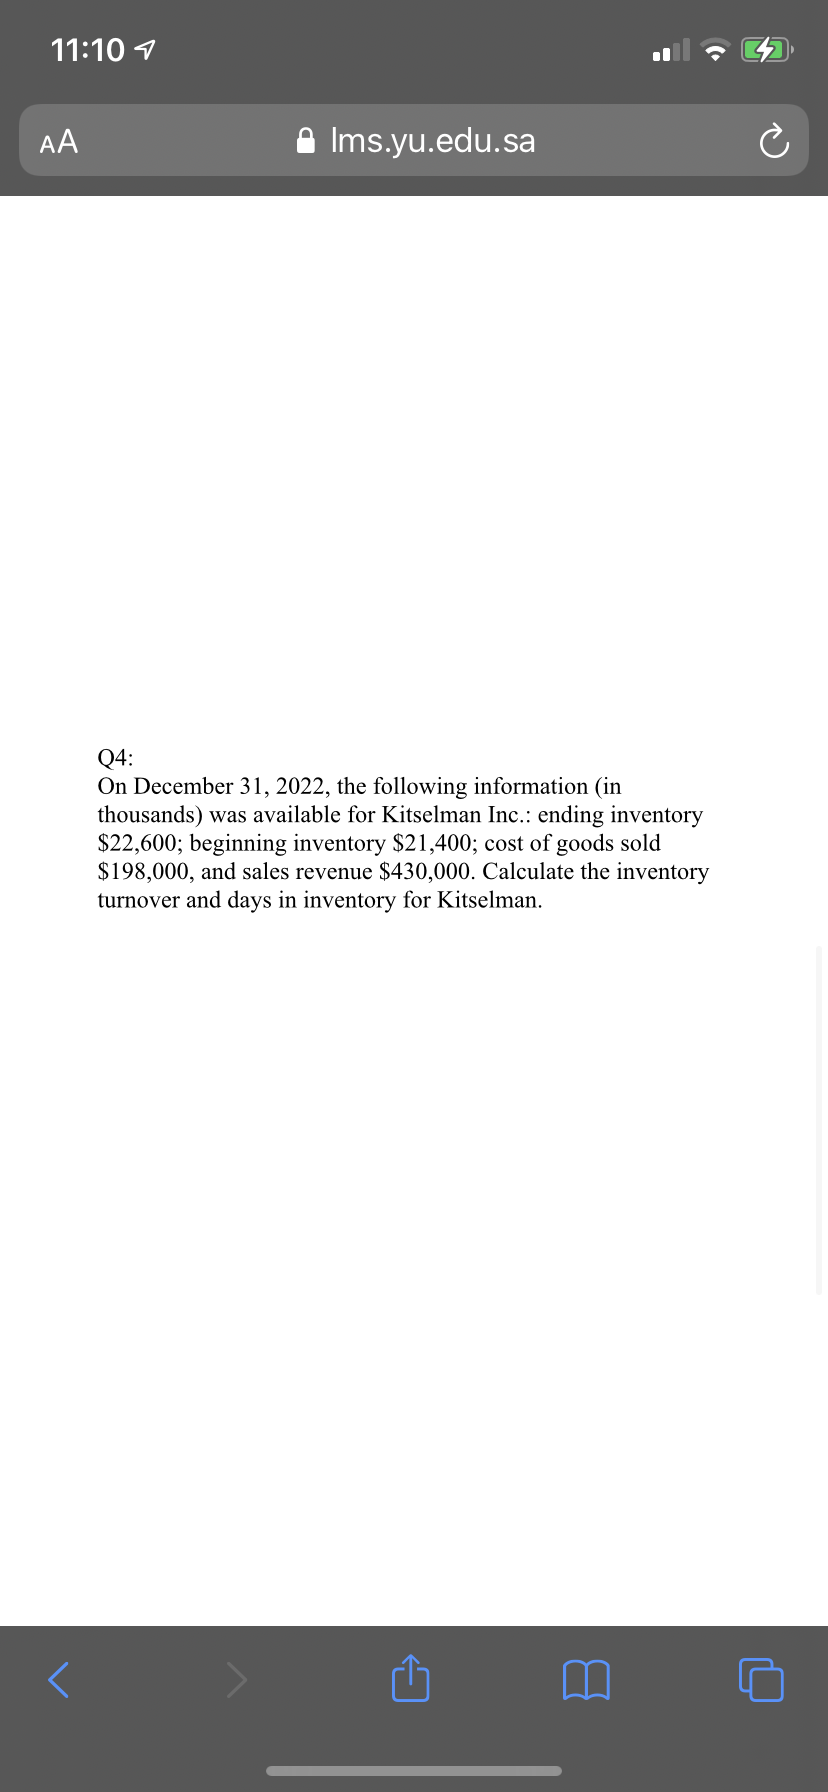 11:10 1
AA
A Ims.yu.edu.sa
Q4:
On December 31, 2022, the following information (in
thousands) was available for Kitselman Inc.: ending inventory
$22,600; beginning inventory $21,400; cost of goods sold
$198,000, and sales revenue $430,000. Calculate the inventory
turnover and days in inventory for Kitselman.
